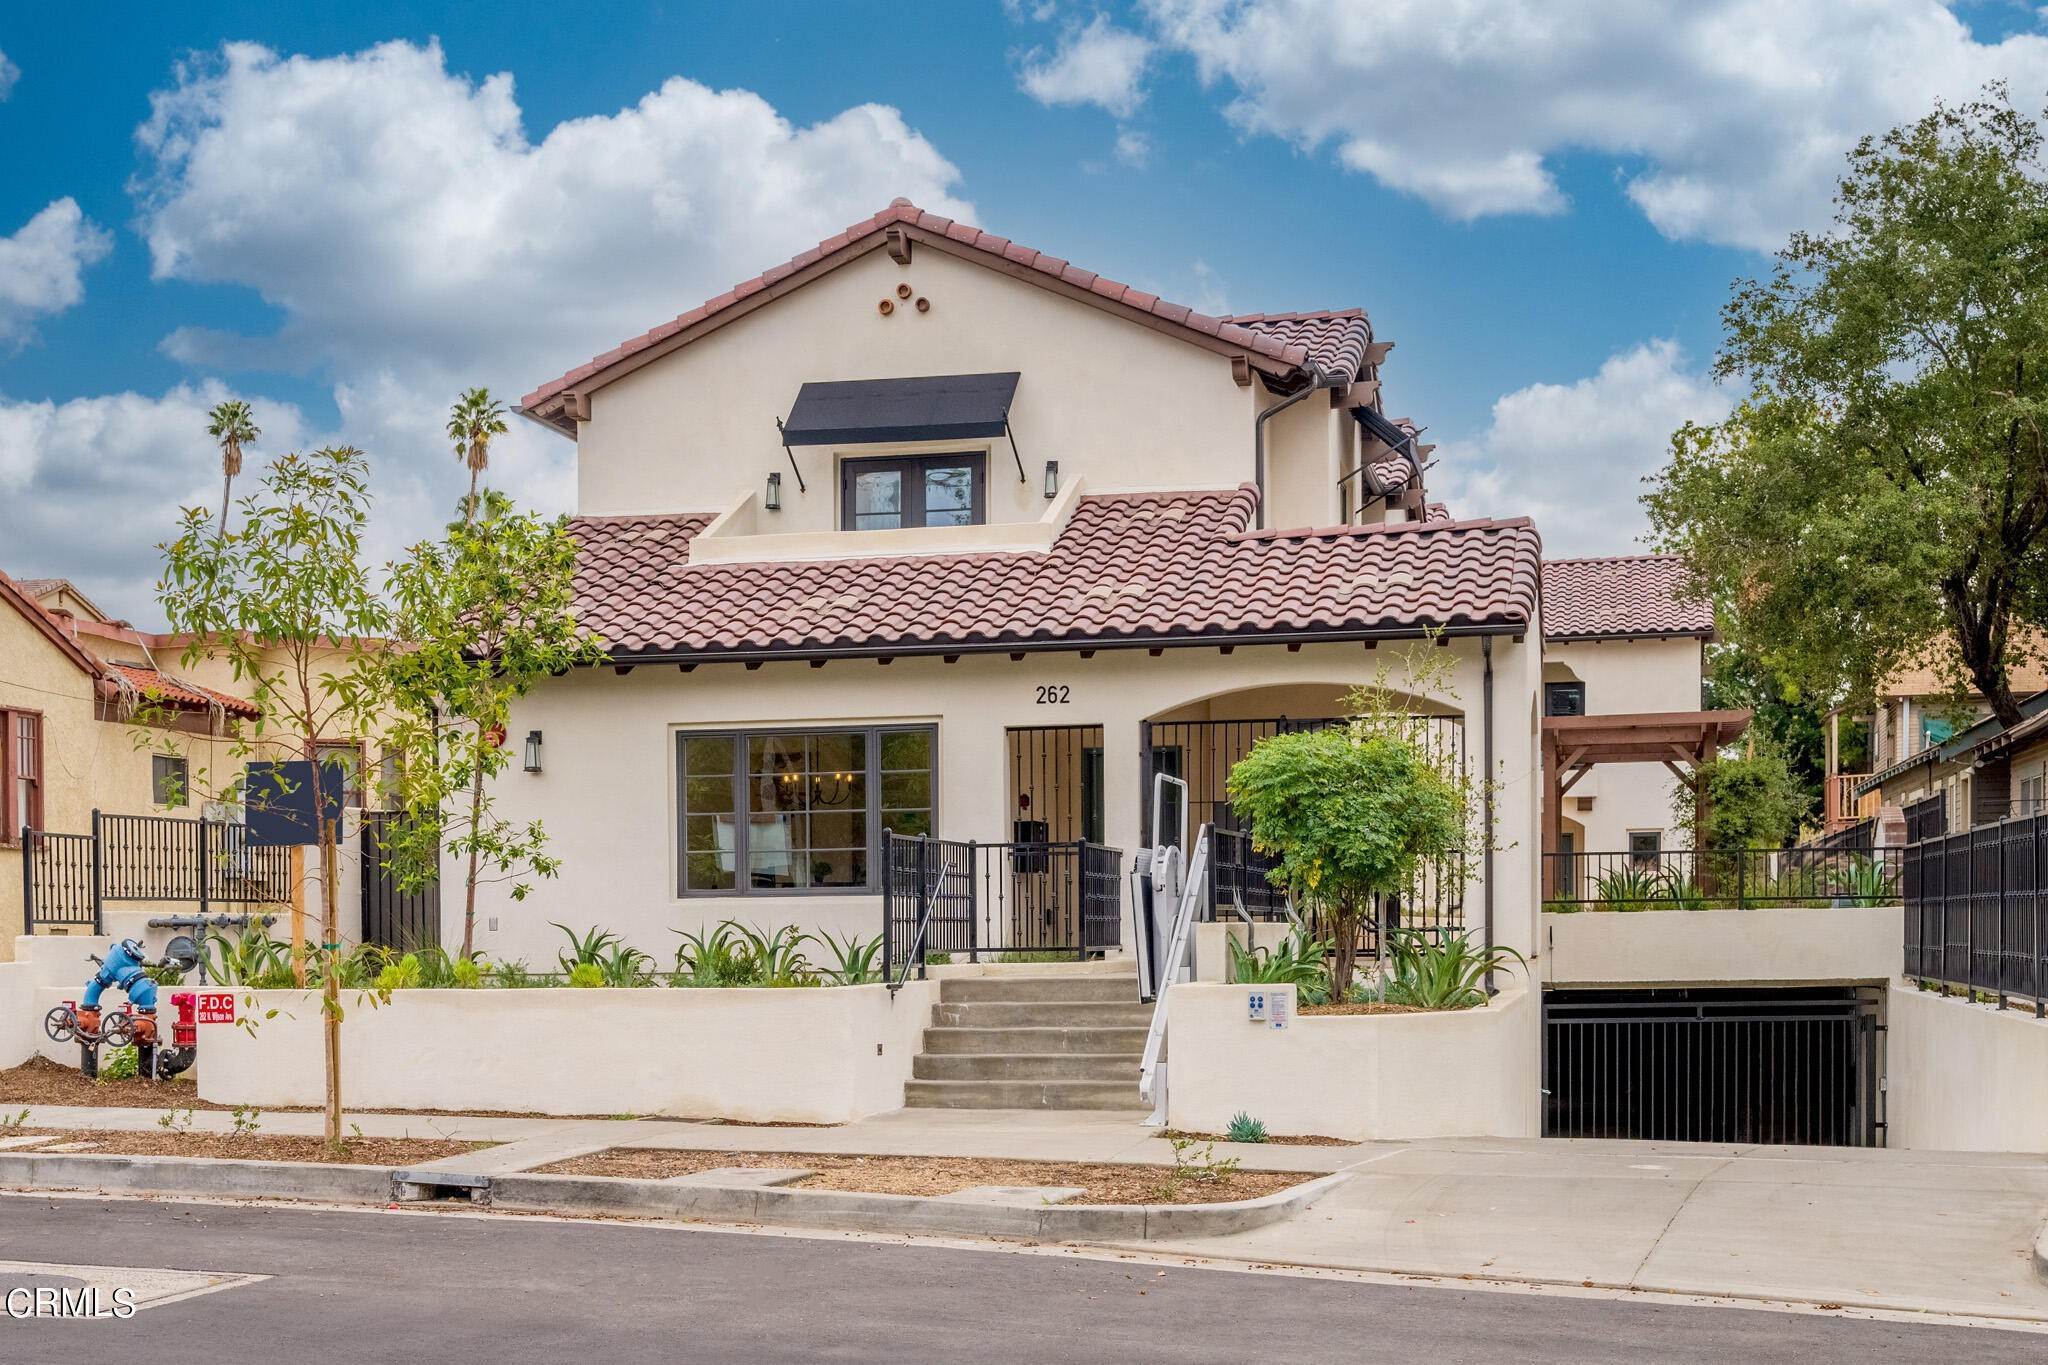 27. townhouses for Sale at 262 North Wilson 101 #101 262 North Wilson 101 Pasadena, California 91106 United States